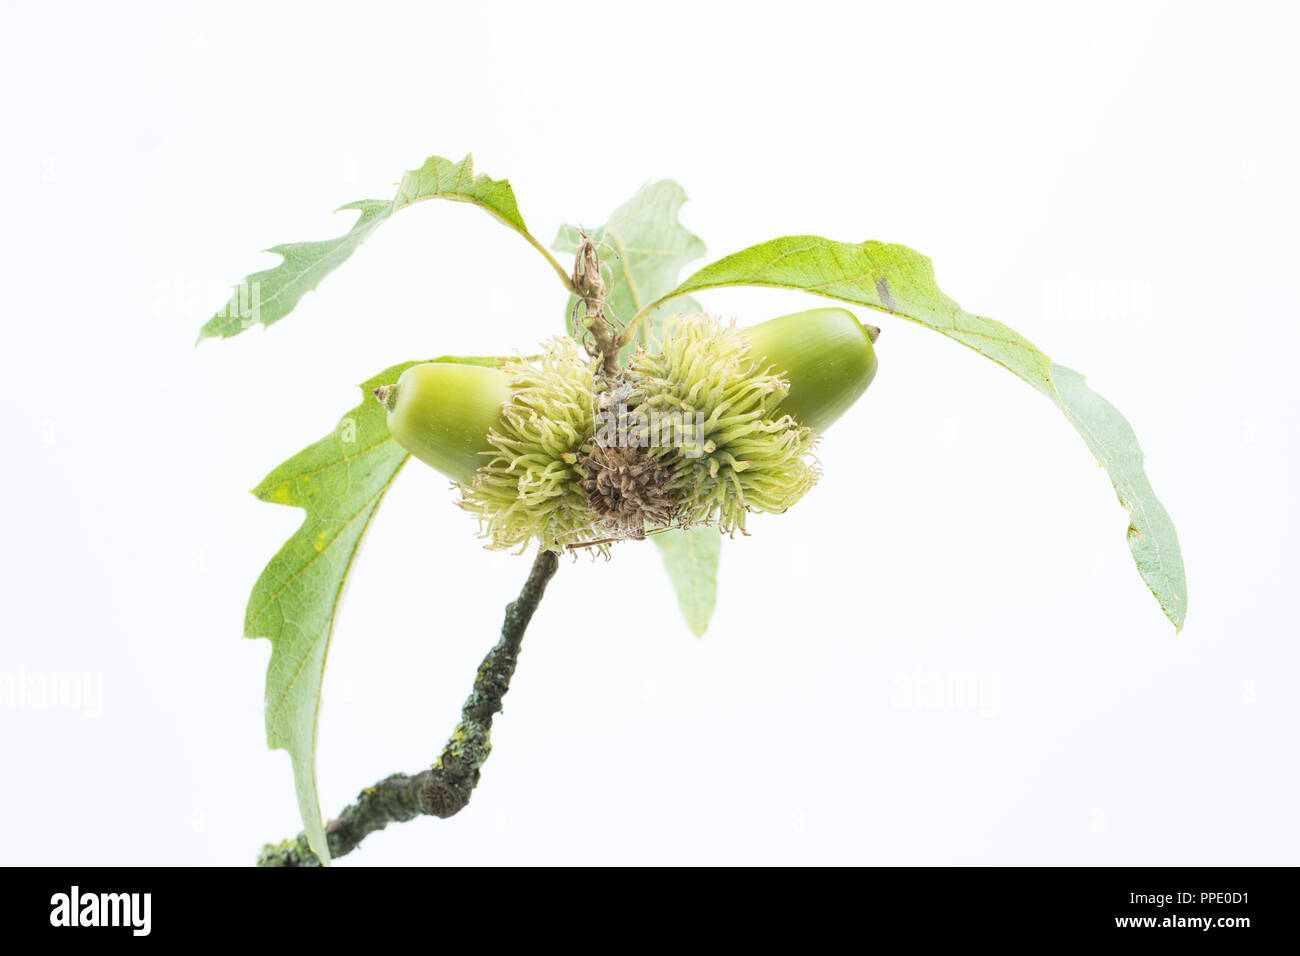 Two acorns of the Turkey oak, Quercus cerris, photographed on a white background. The Turkey oak was introduced to the UK in the early 18th century co Stock Photo